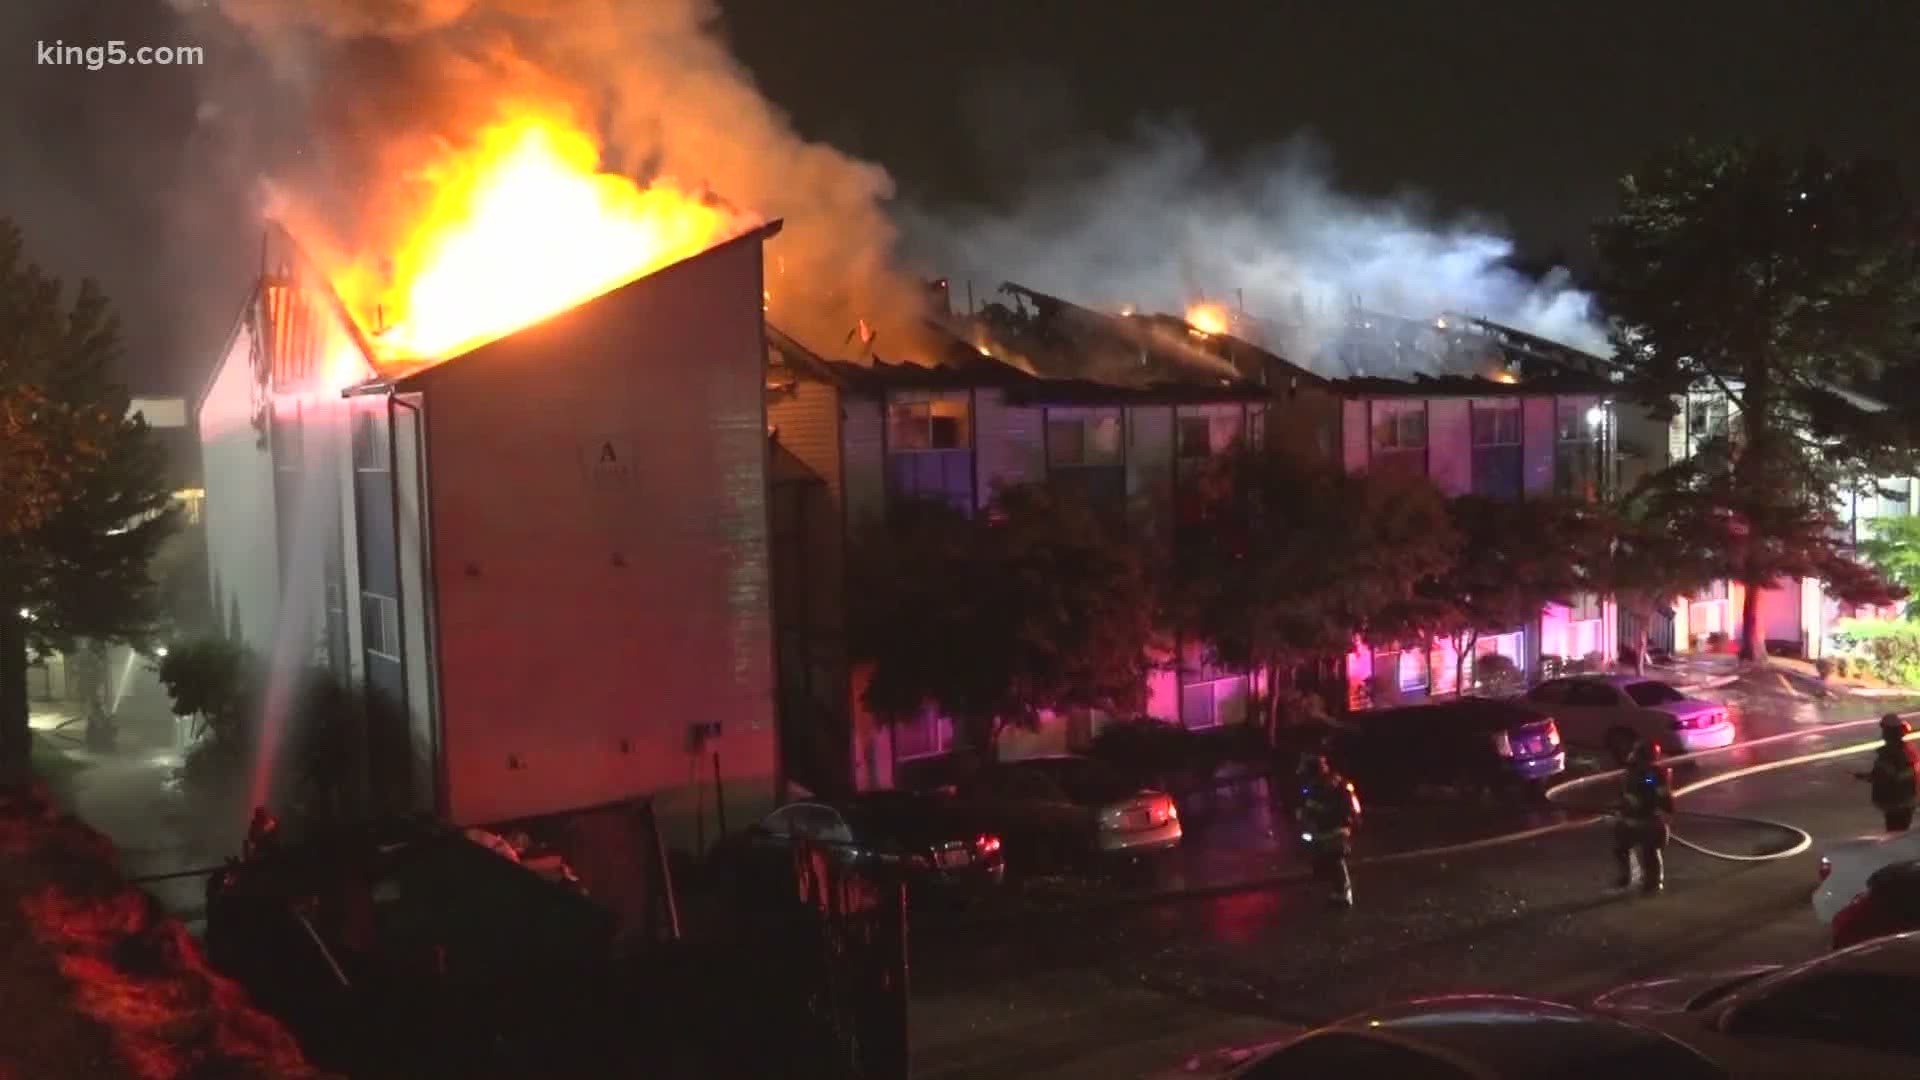 A fire ripped through a Tukwila apartment complex early Wednesday morning. The cause of the fire is under investigation.